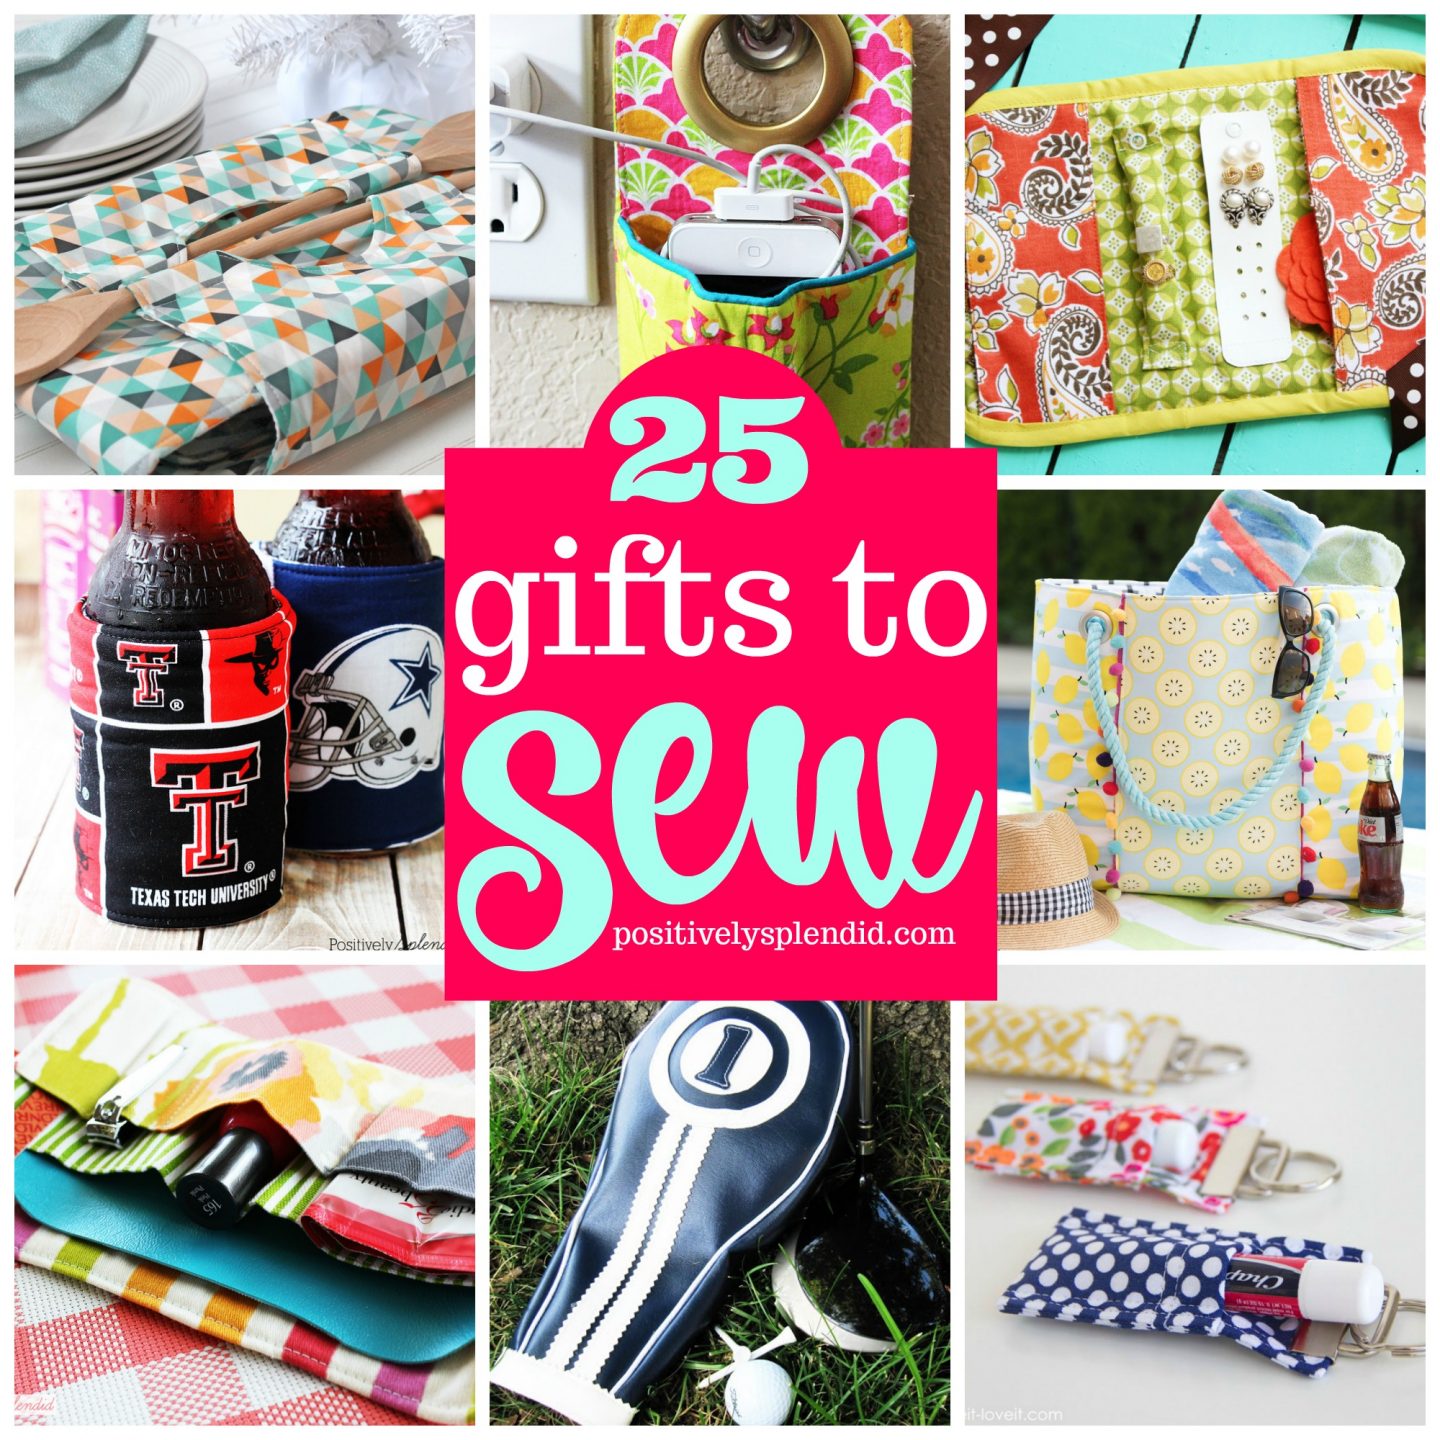 Top 10 Gifts to Sew for Women - 2021 